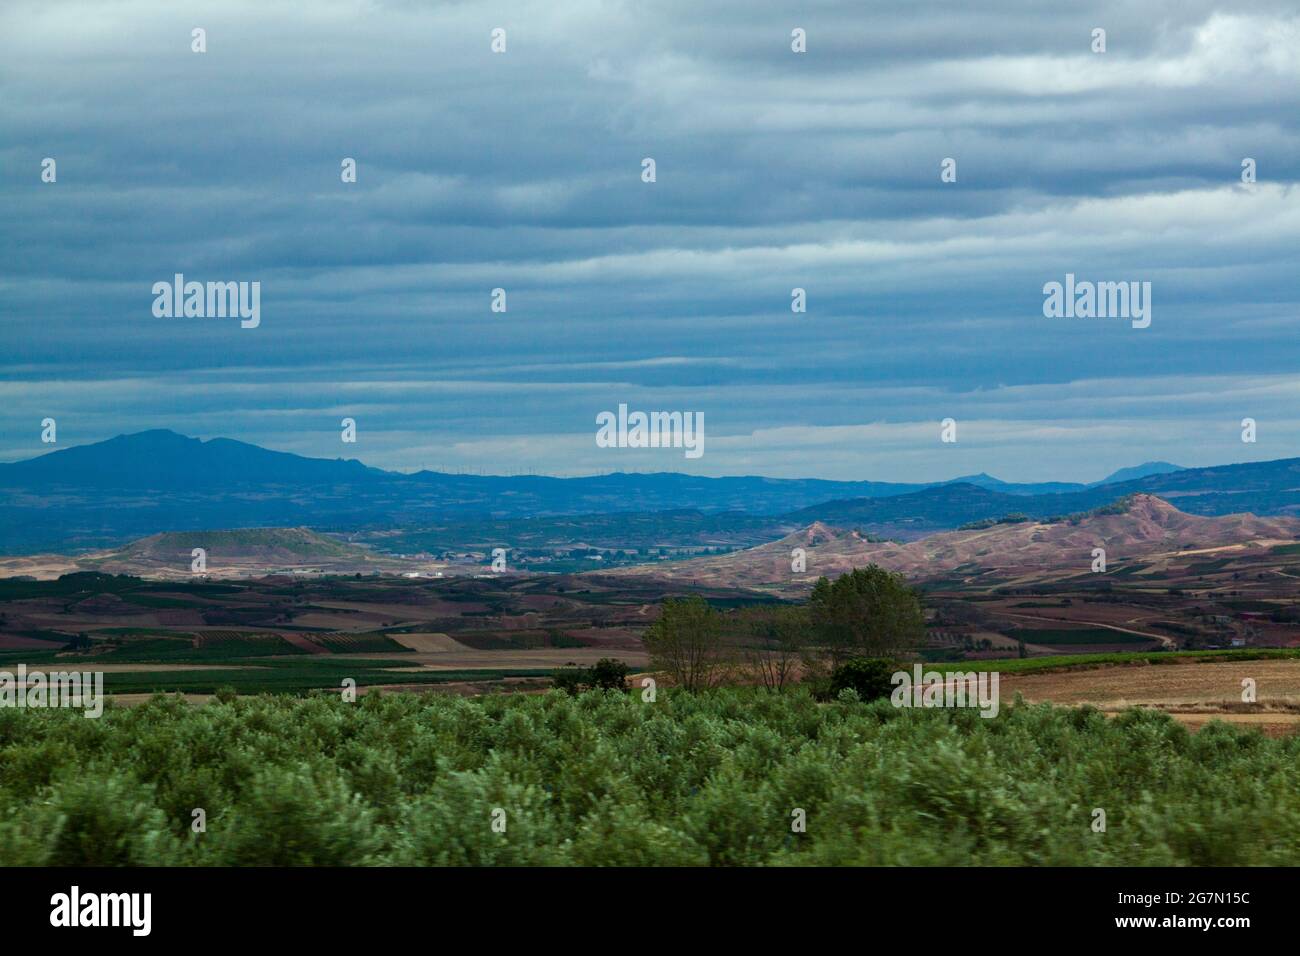 Nájera agricultural landscape, Spain Stock Photo